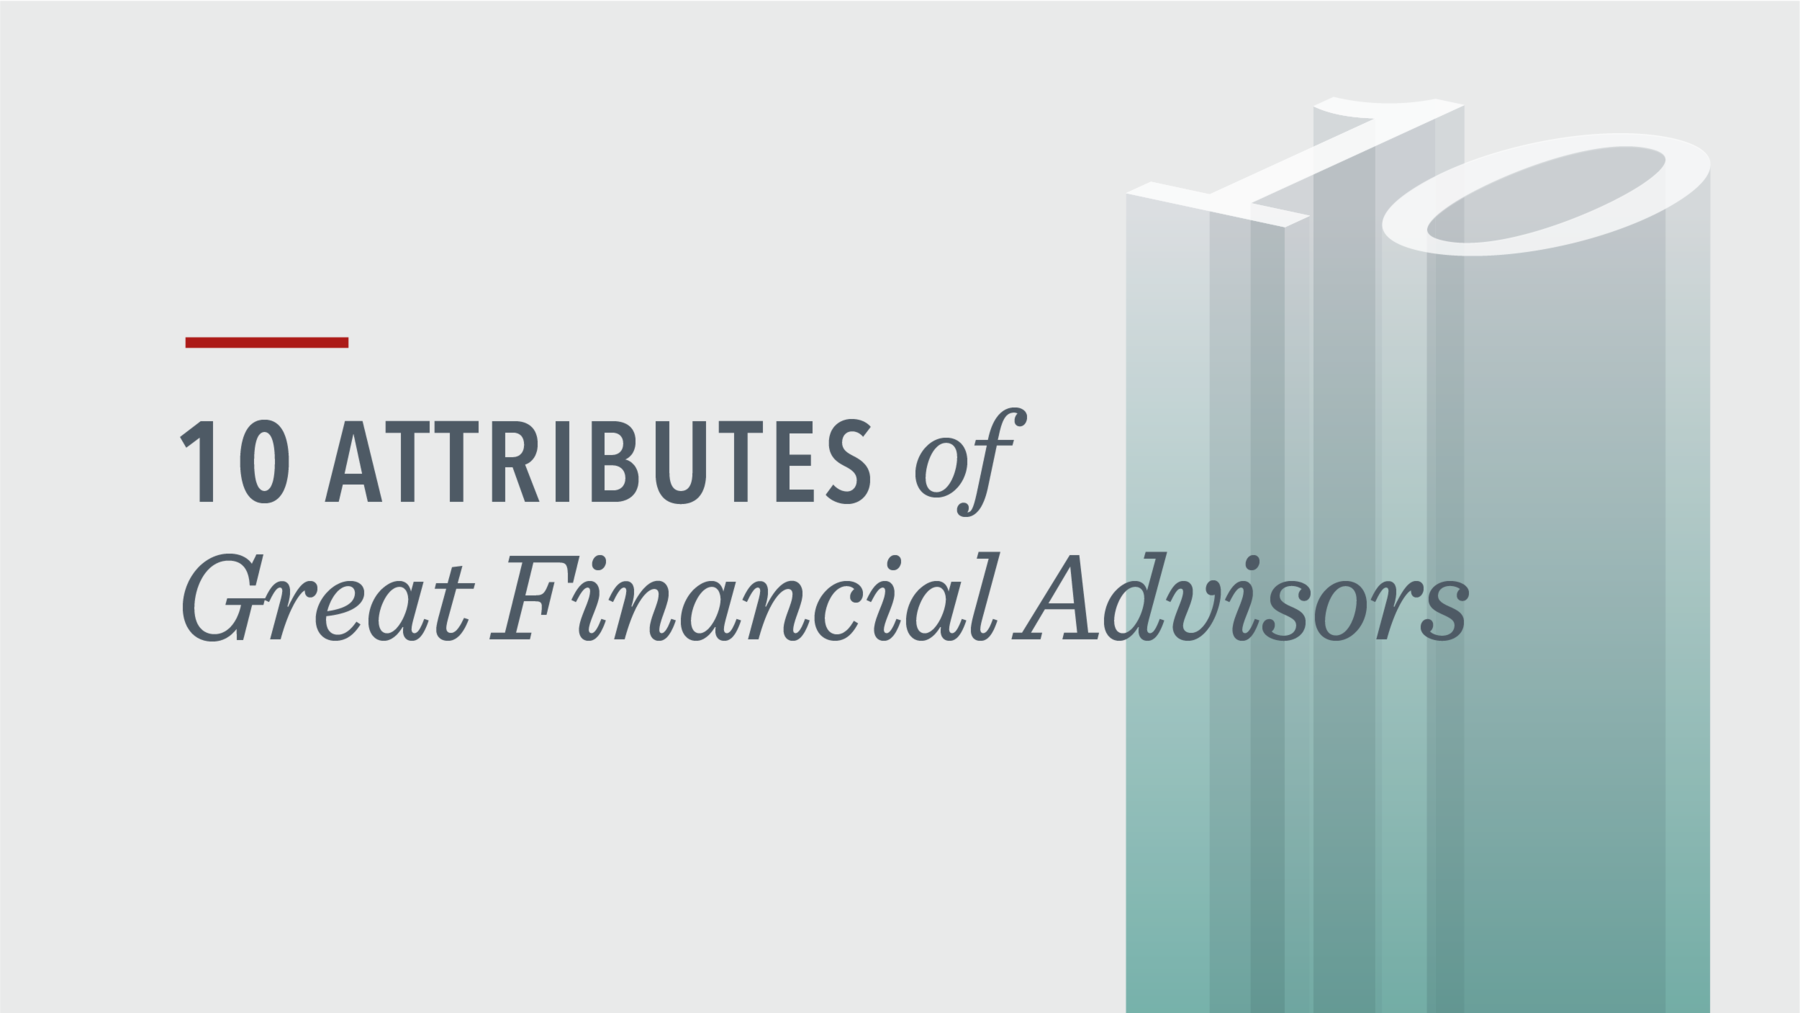 10 Attributes of Great Financial Advisors